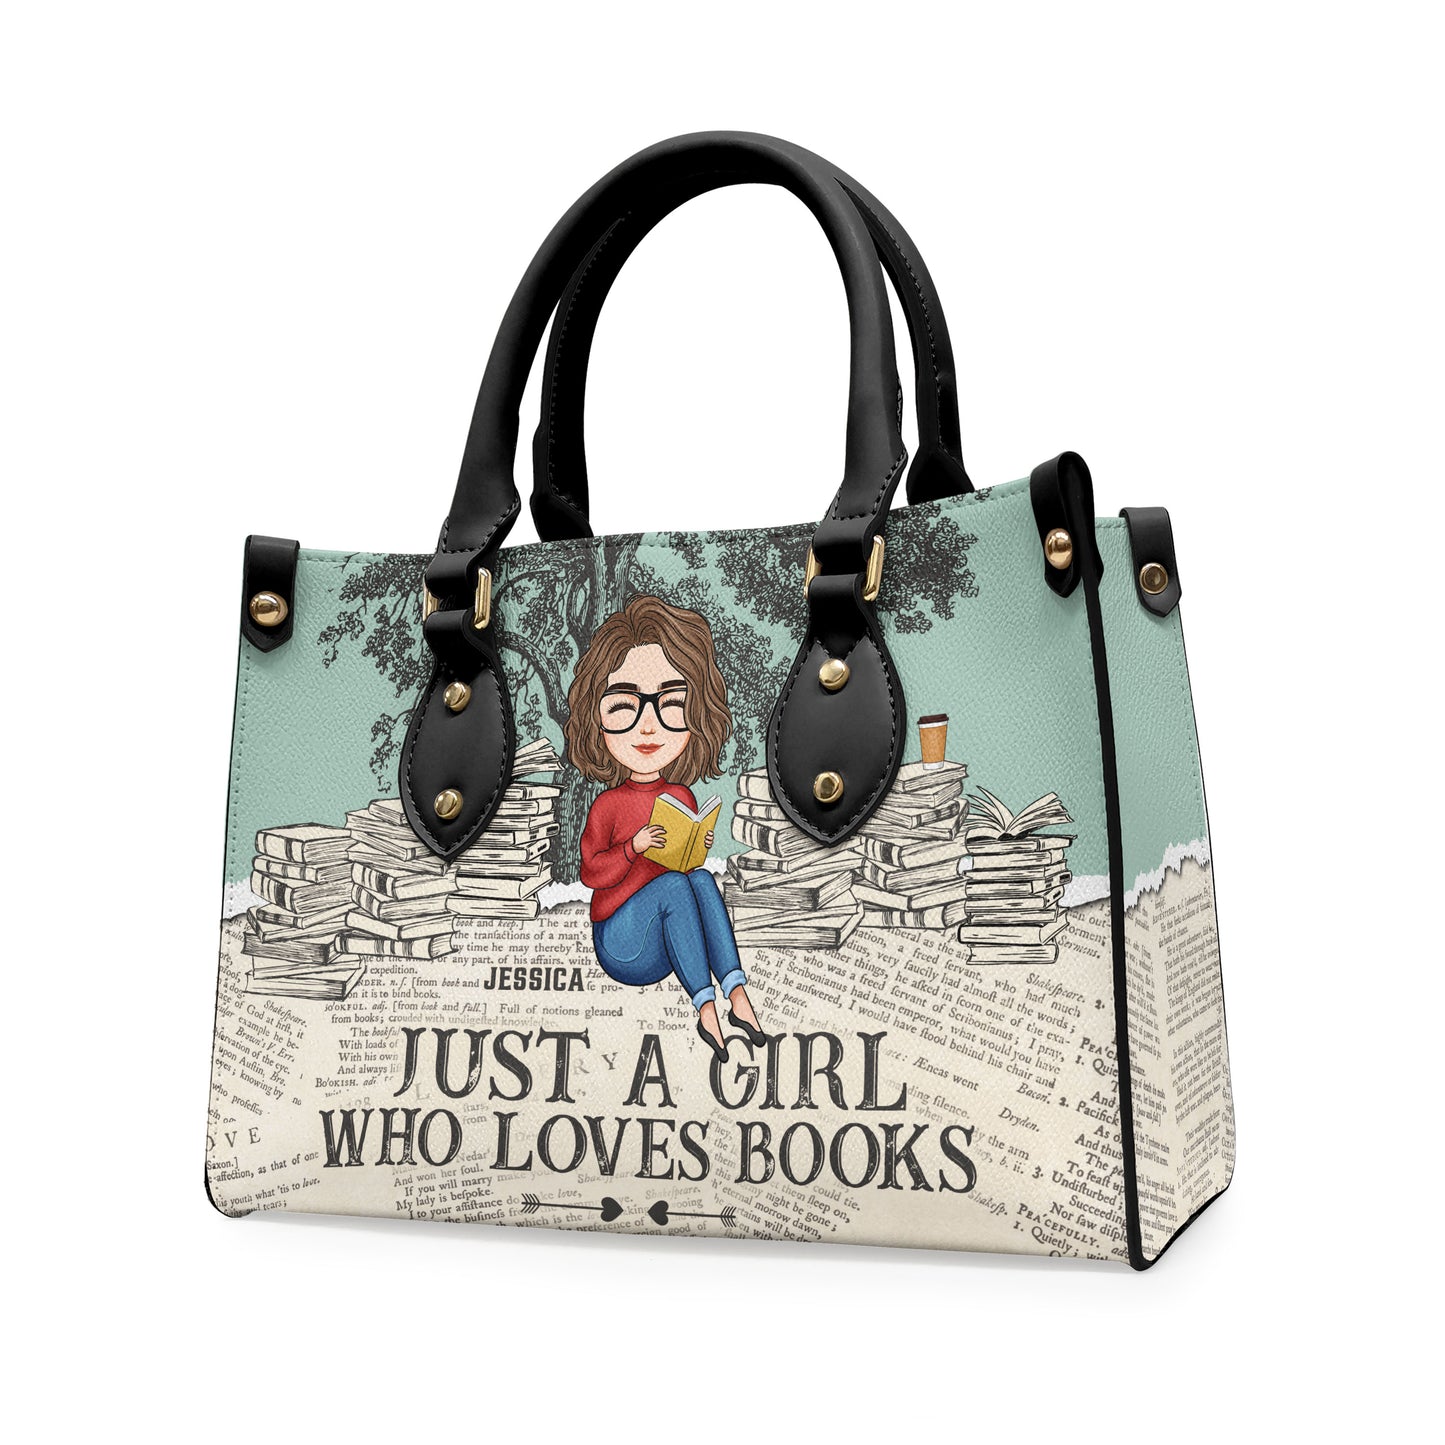 Just A Girl Who Loves Books - Personalized Leather Bag - Birthday, Loving Gift For Her, Book Nerds, Book Lovers, People Love Reading